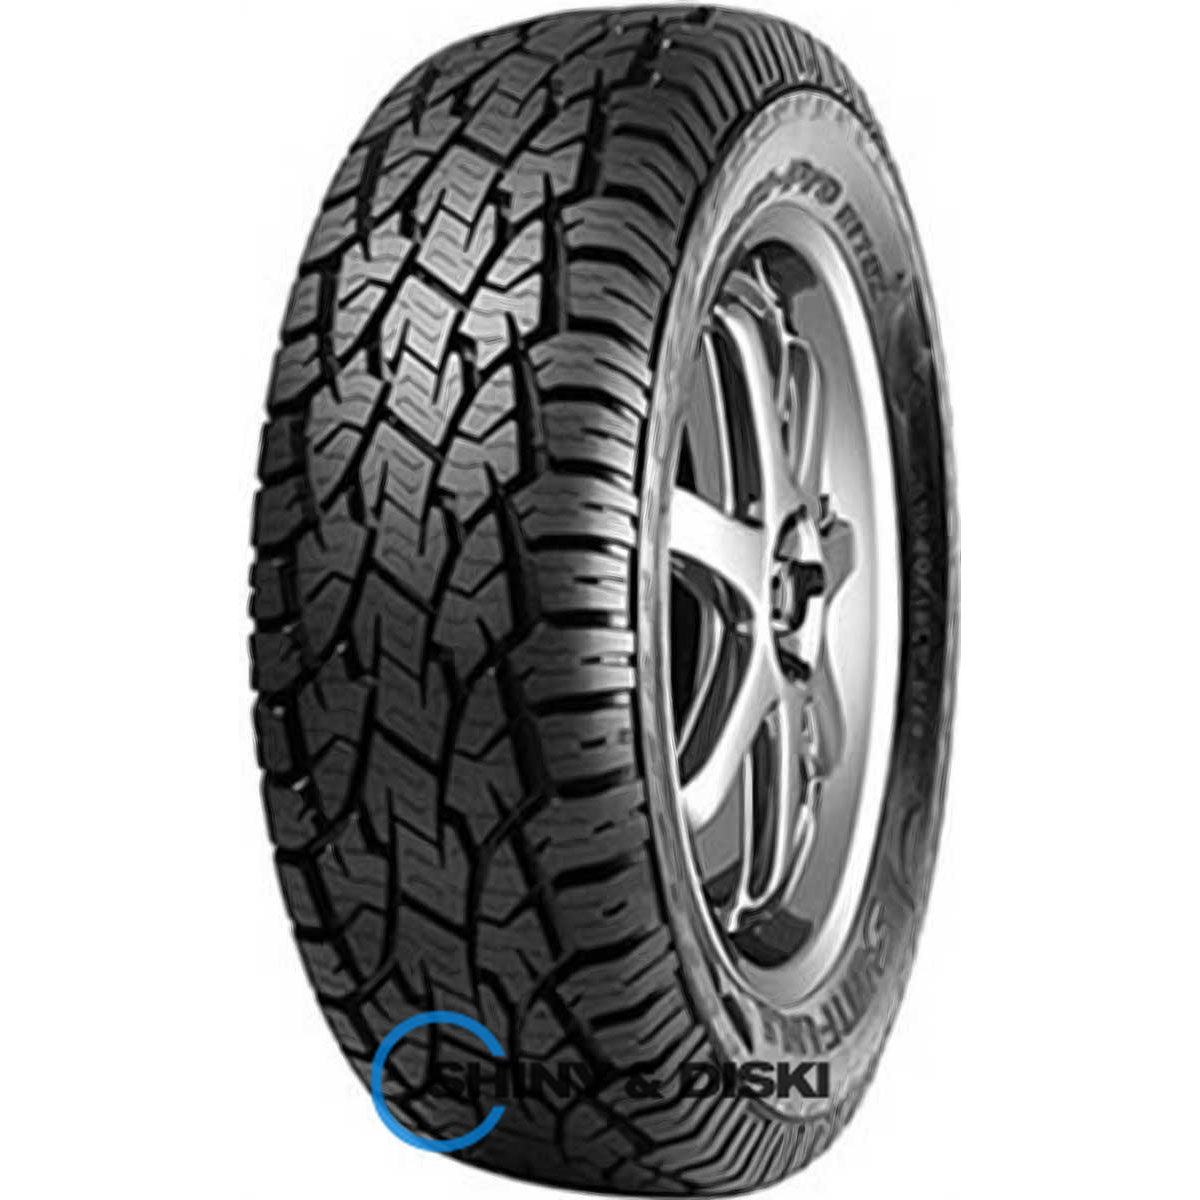 sunfull mont-pro at782 245/70 r16 107t